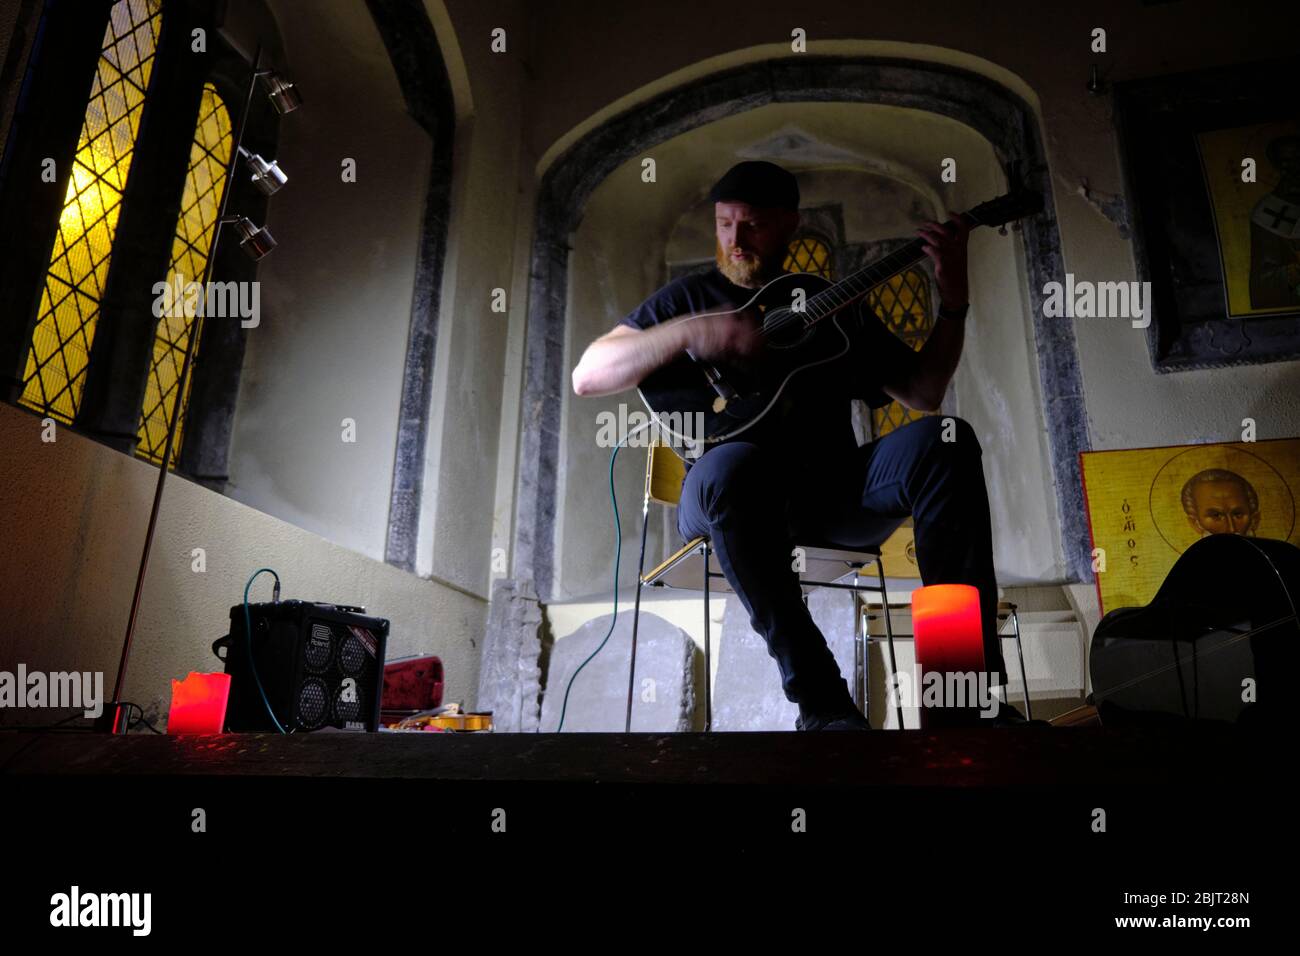 GALWAY, IRELAND - August 21 2019: a typical folk singer plays the guitar during a concert in an old church. Stock Photo